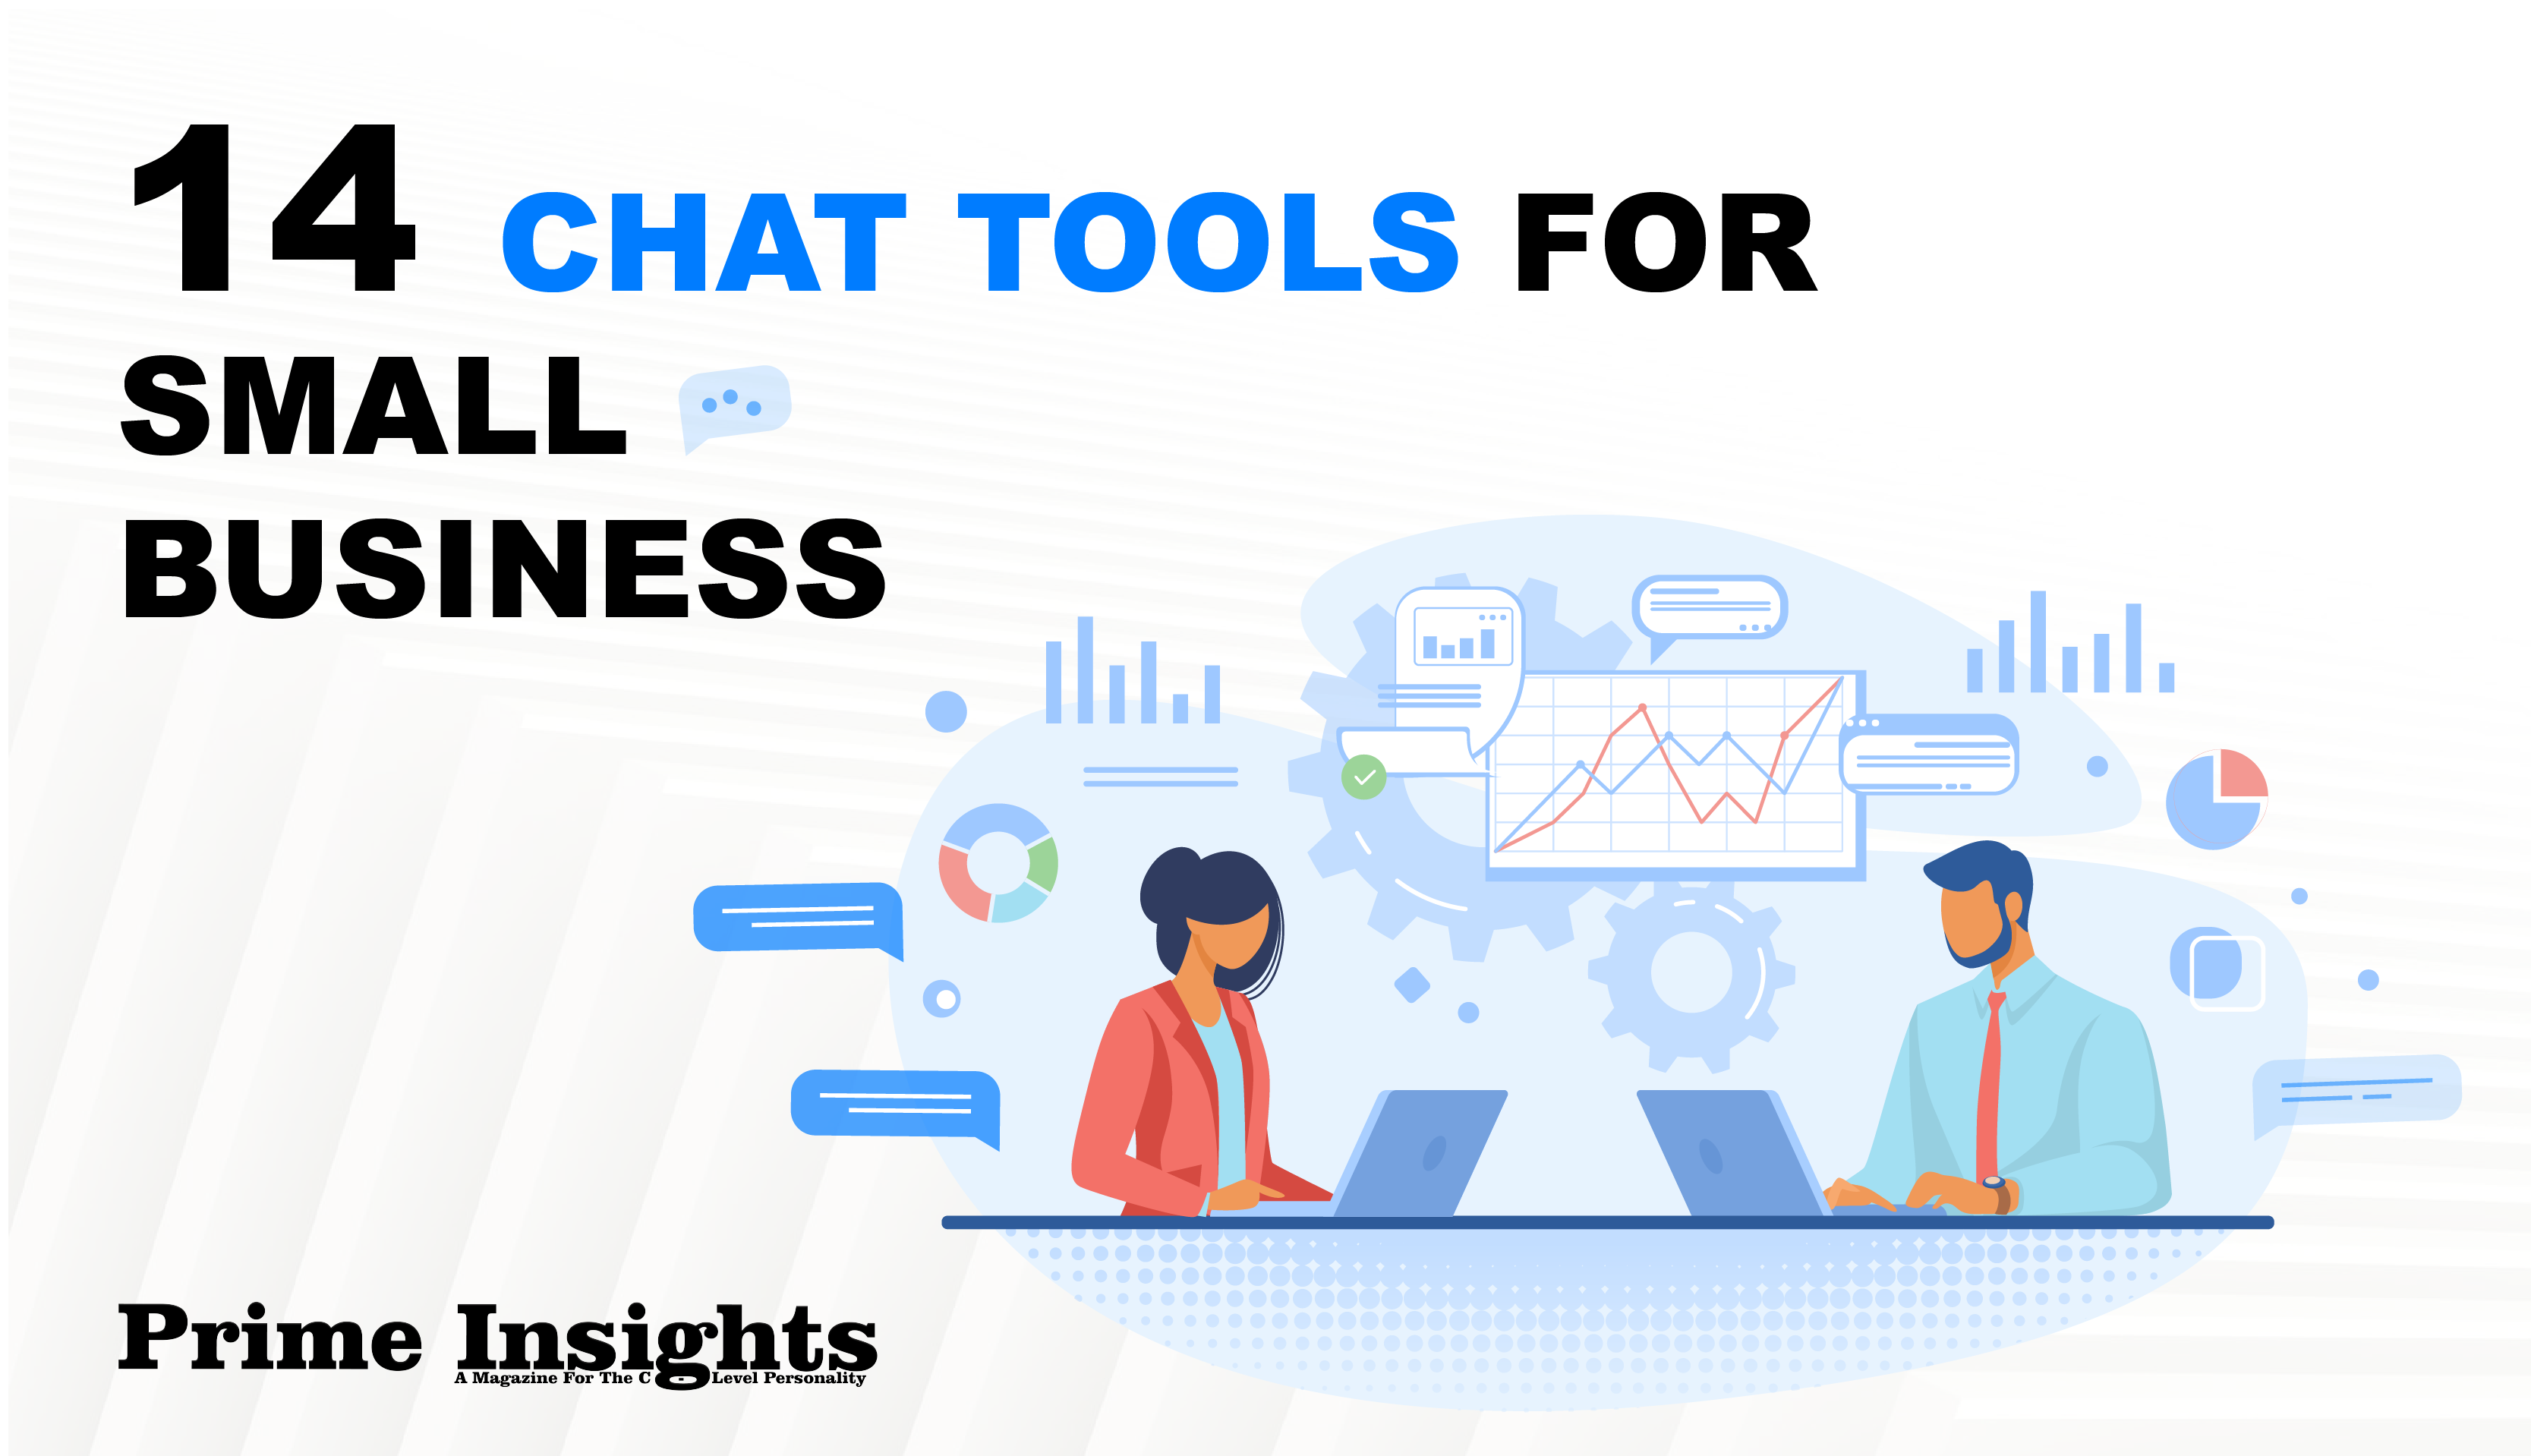 14 CHAT TOOLS FOR SMALL BUSINESS